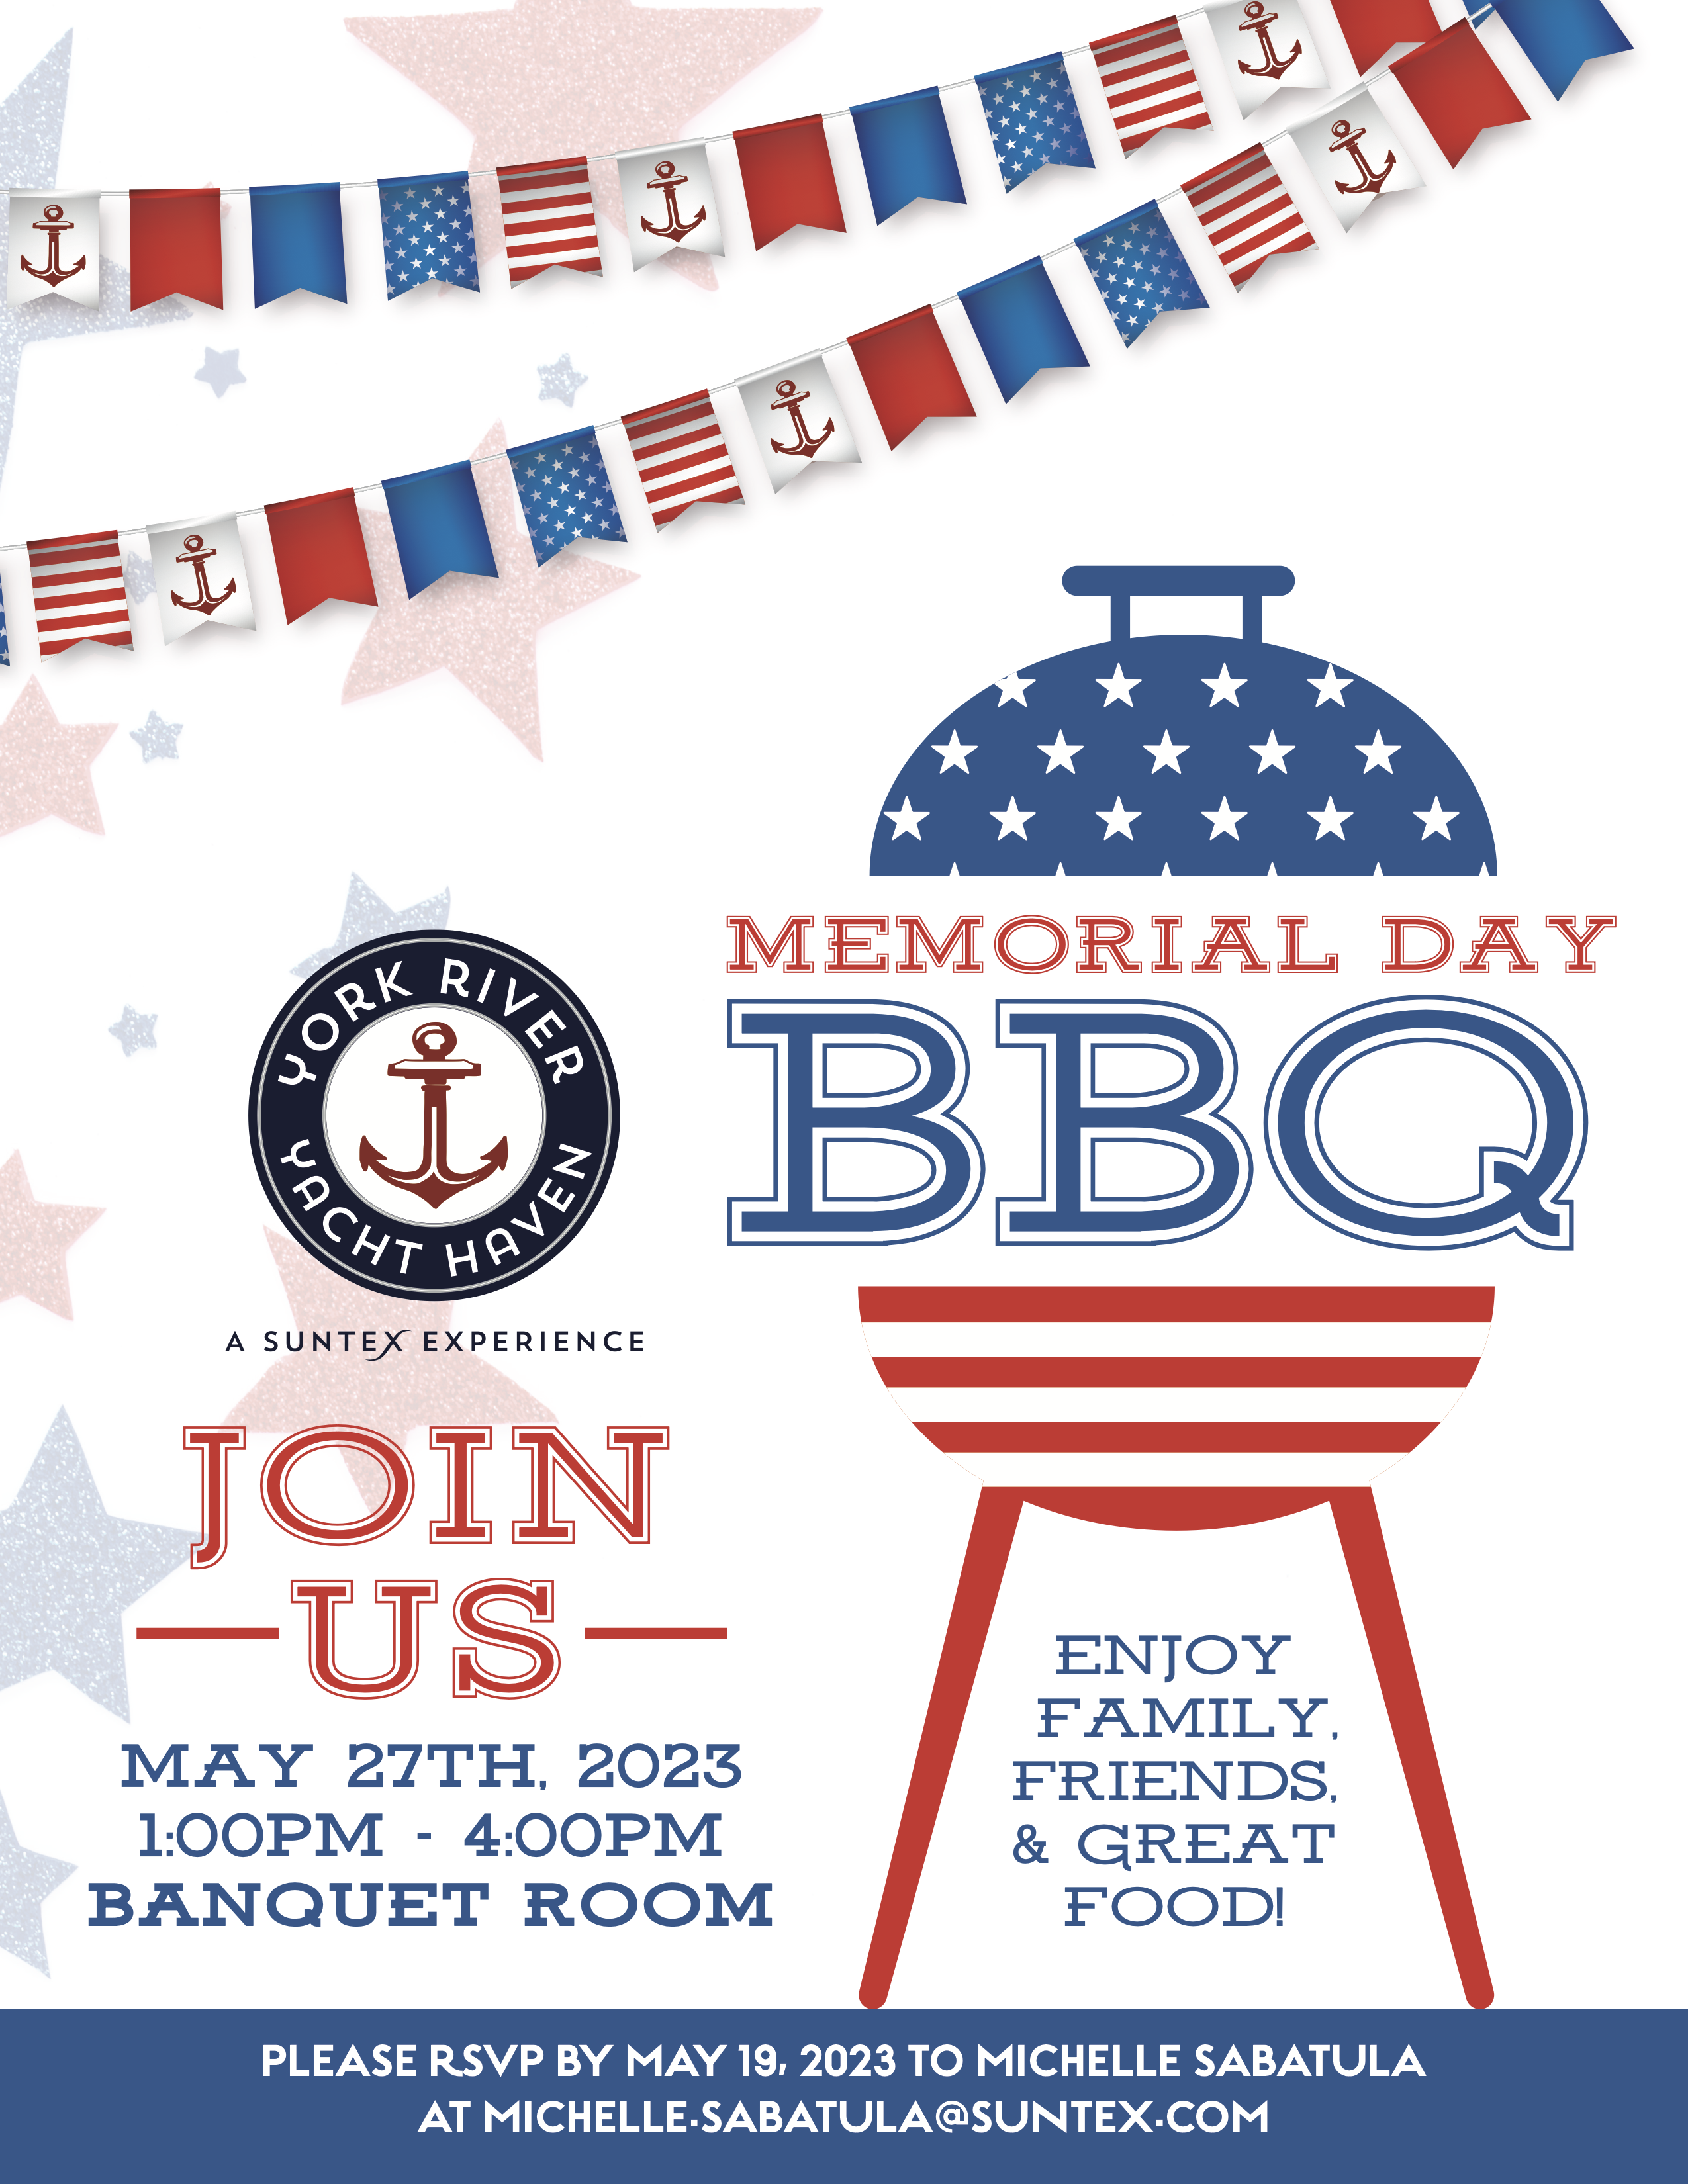 Memorial Day BBQ Event